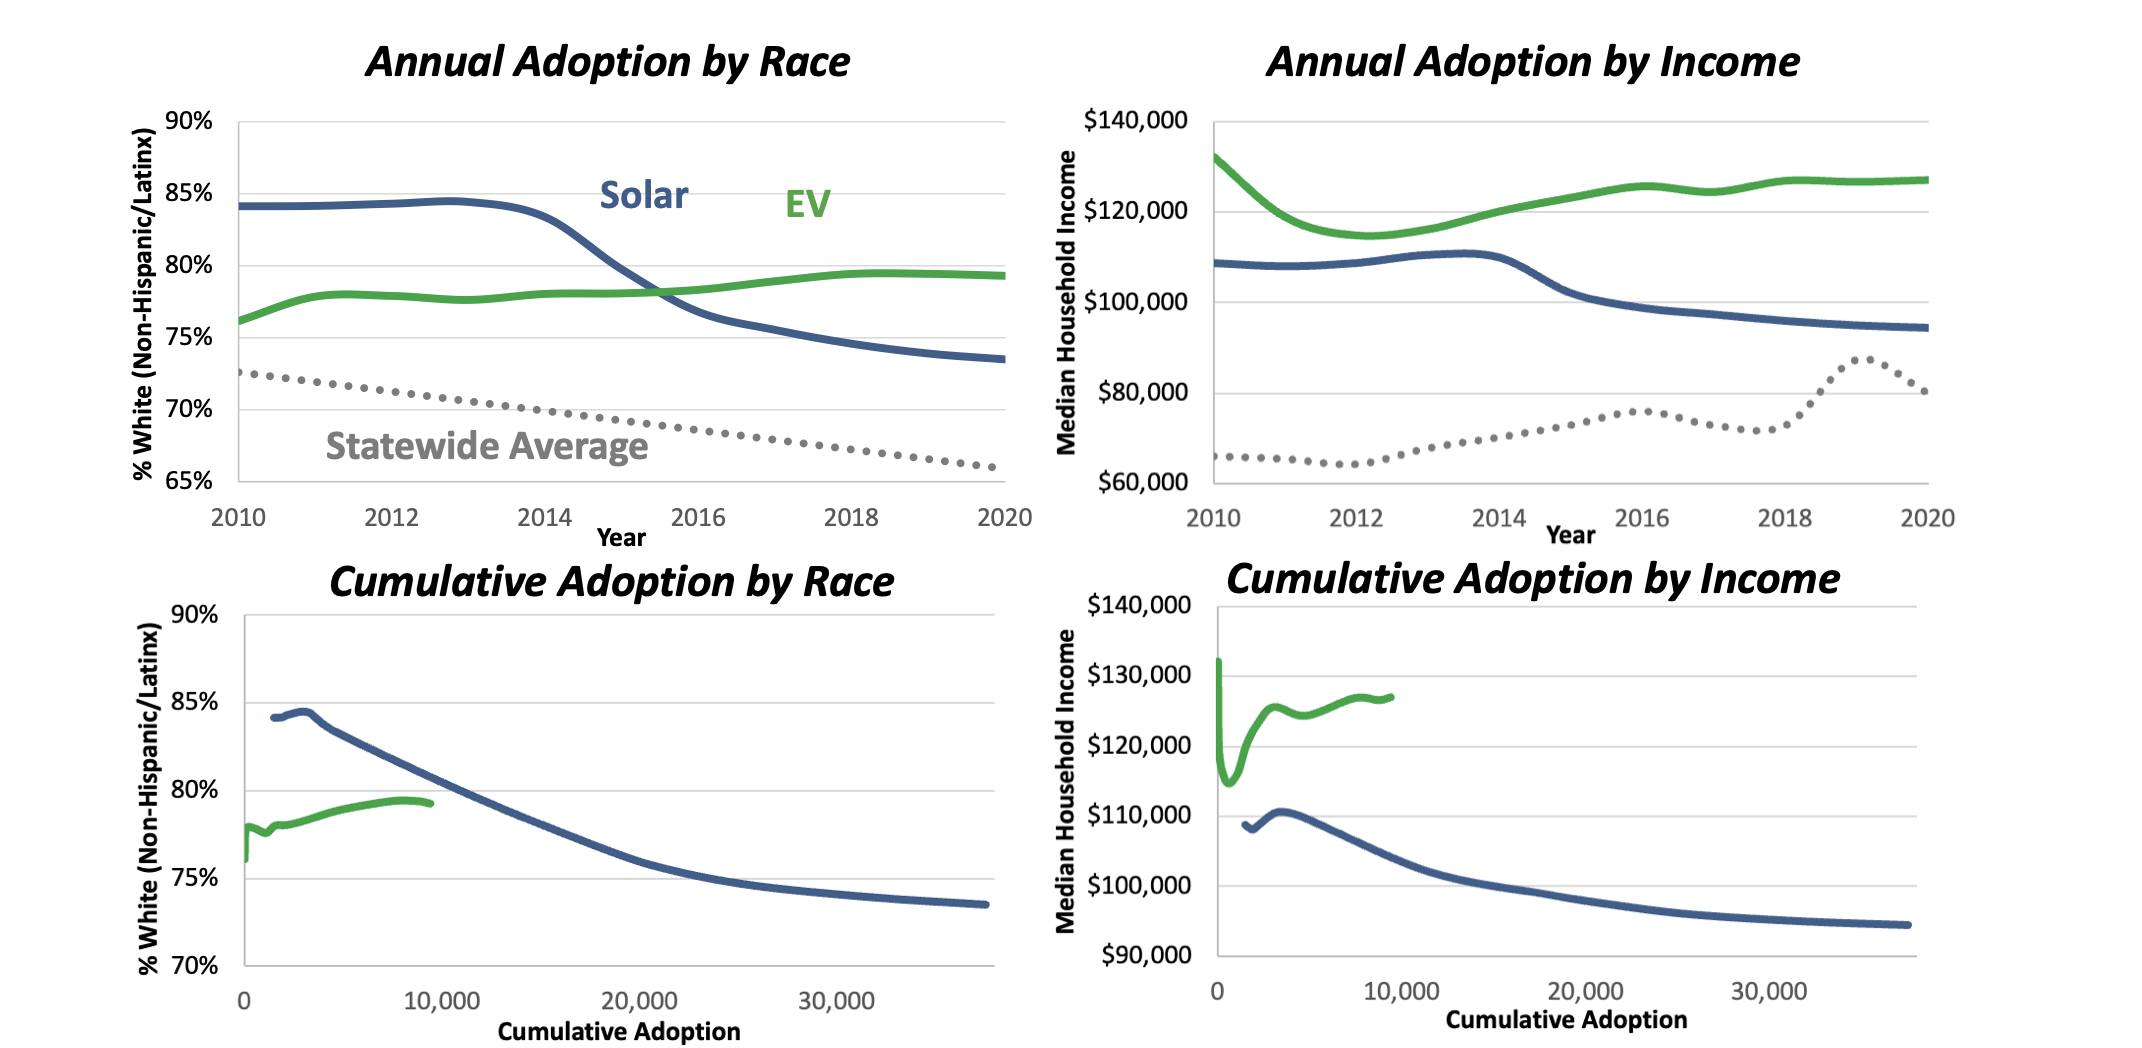 Line charts on Who Is Adopting EVs and Solar